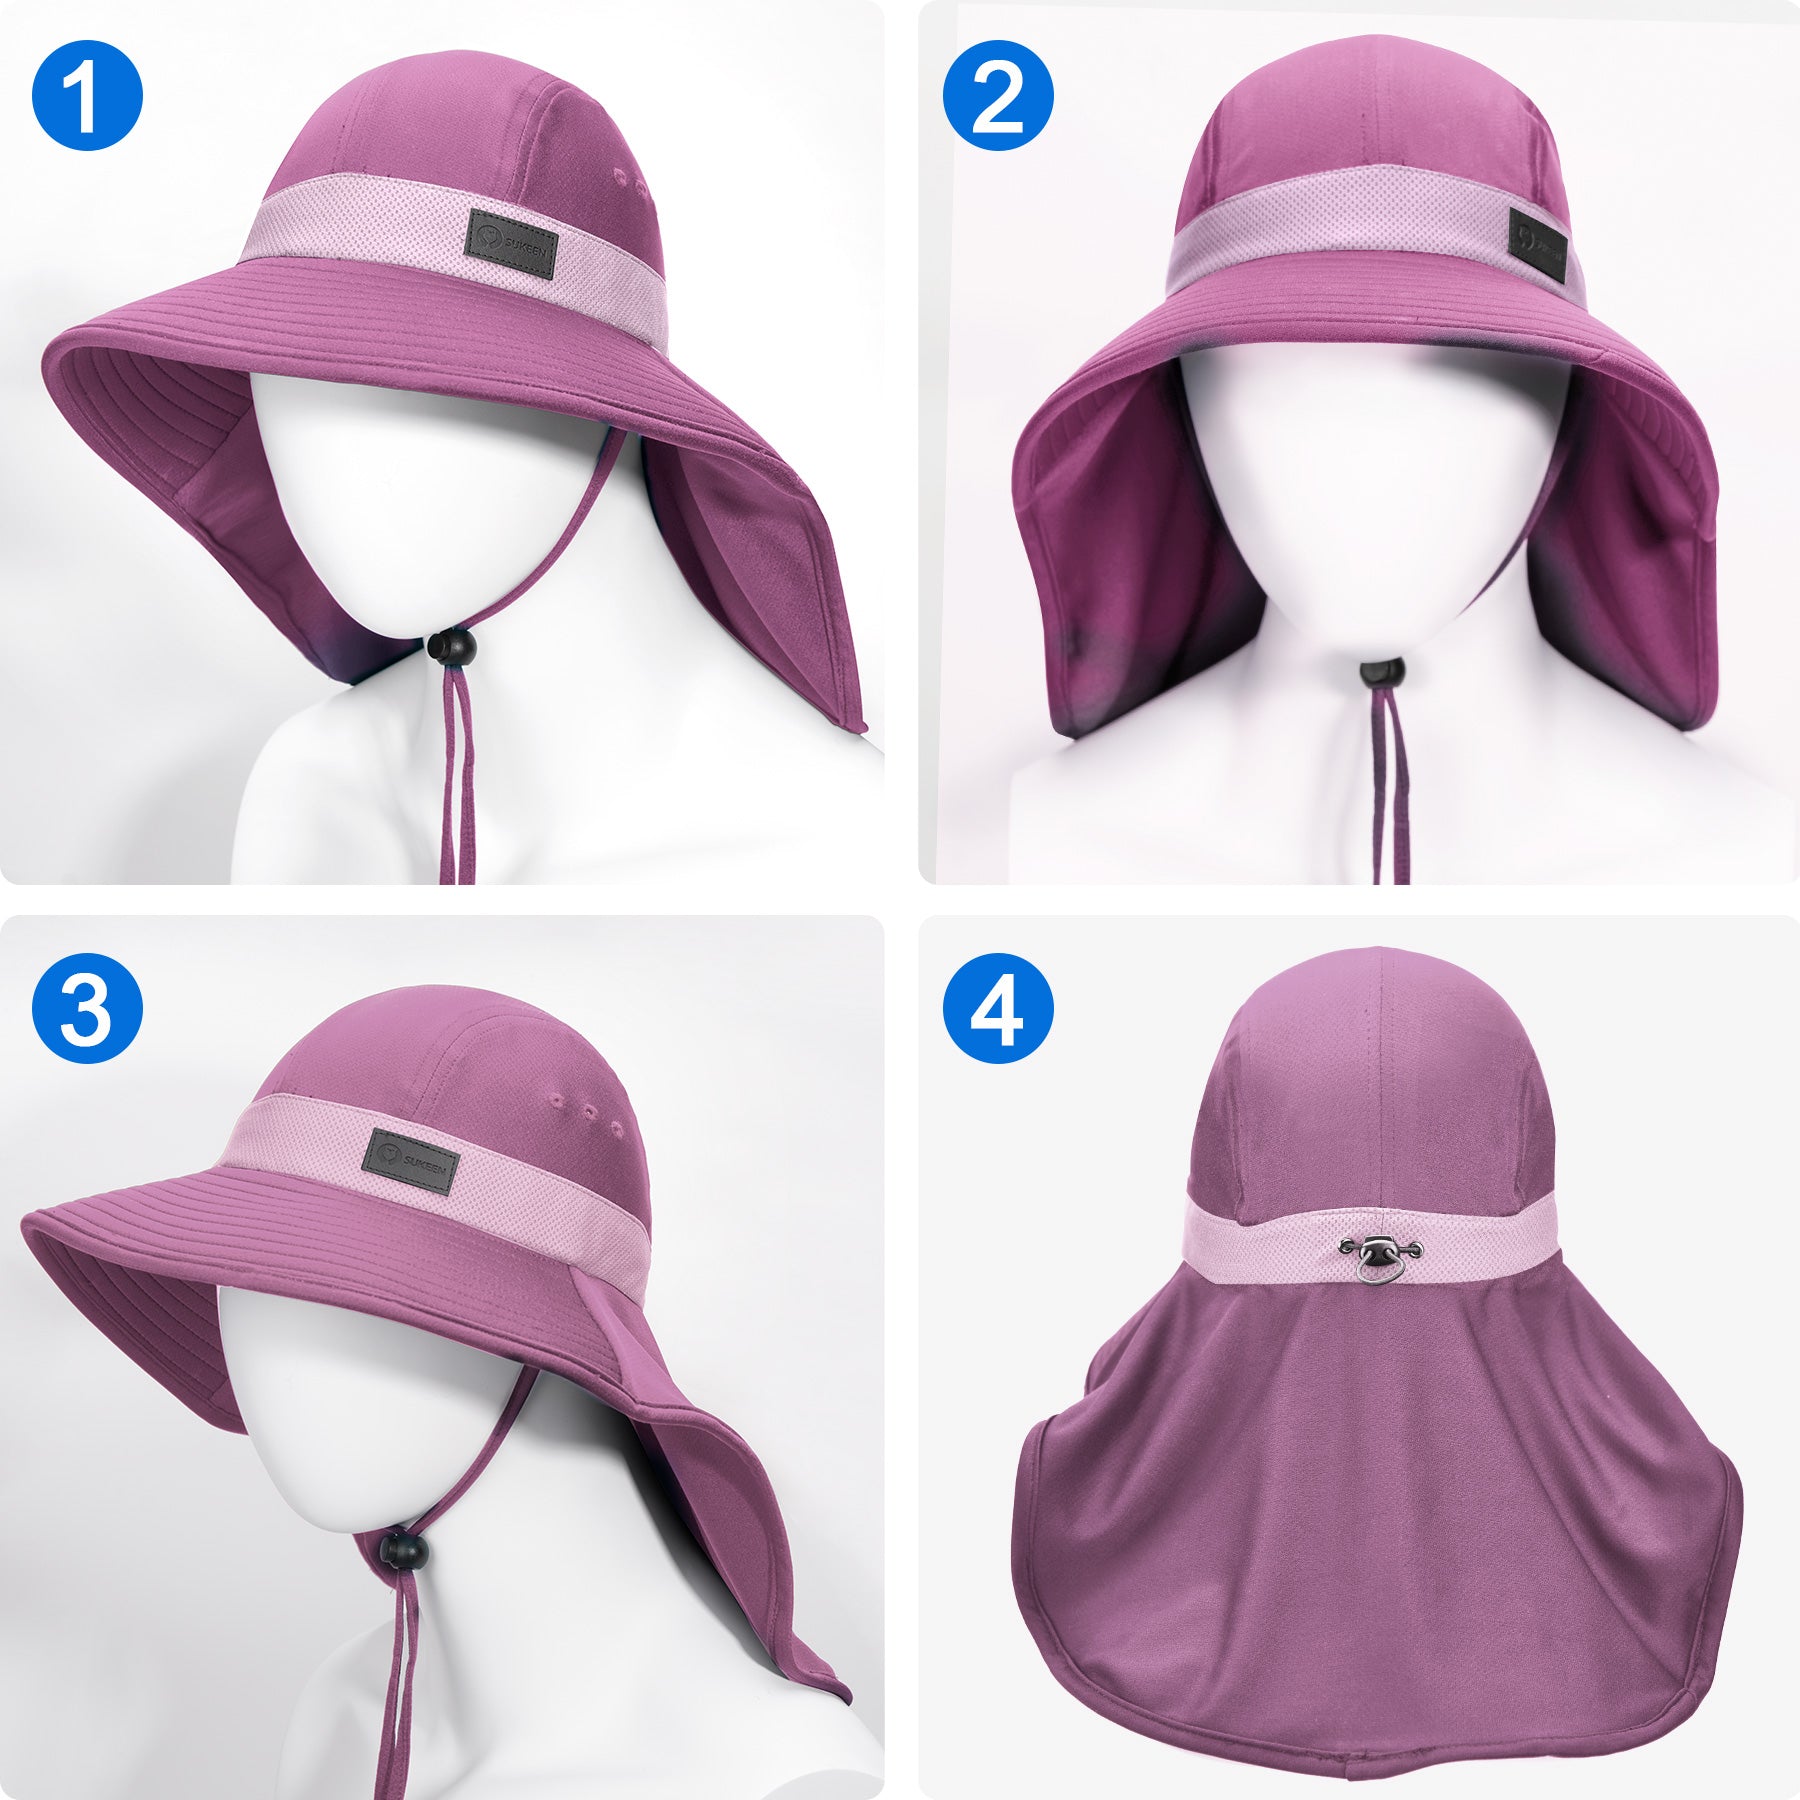 Sukeen Cooling Hat For Neck,Soft Ice Chilly Headwear ChillCap®